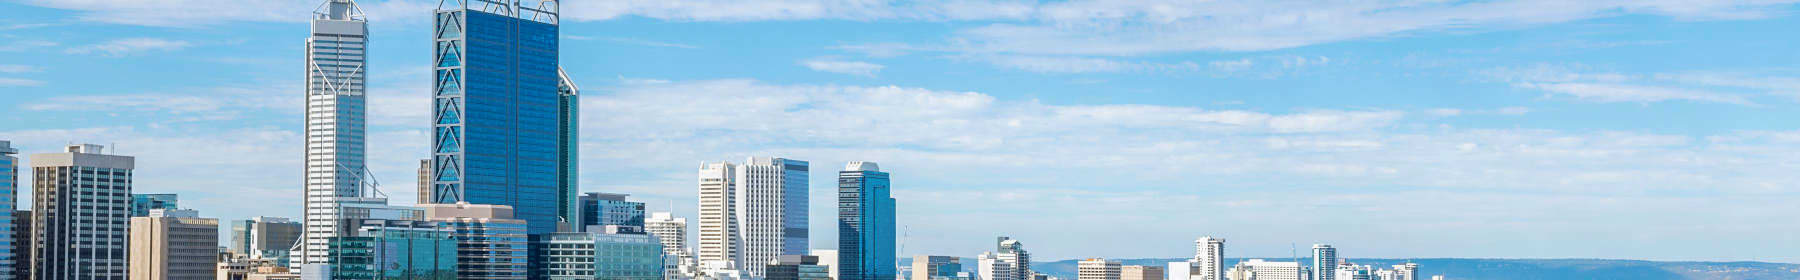 A view of the Perth city skyline - removals to Perth